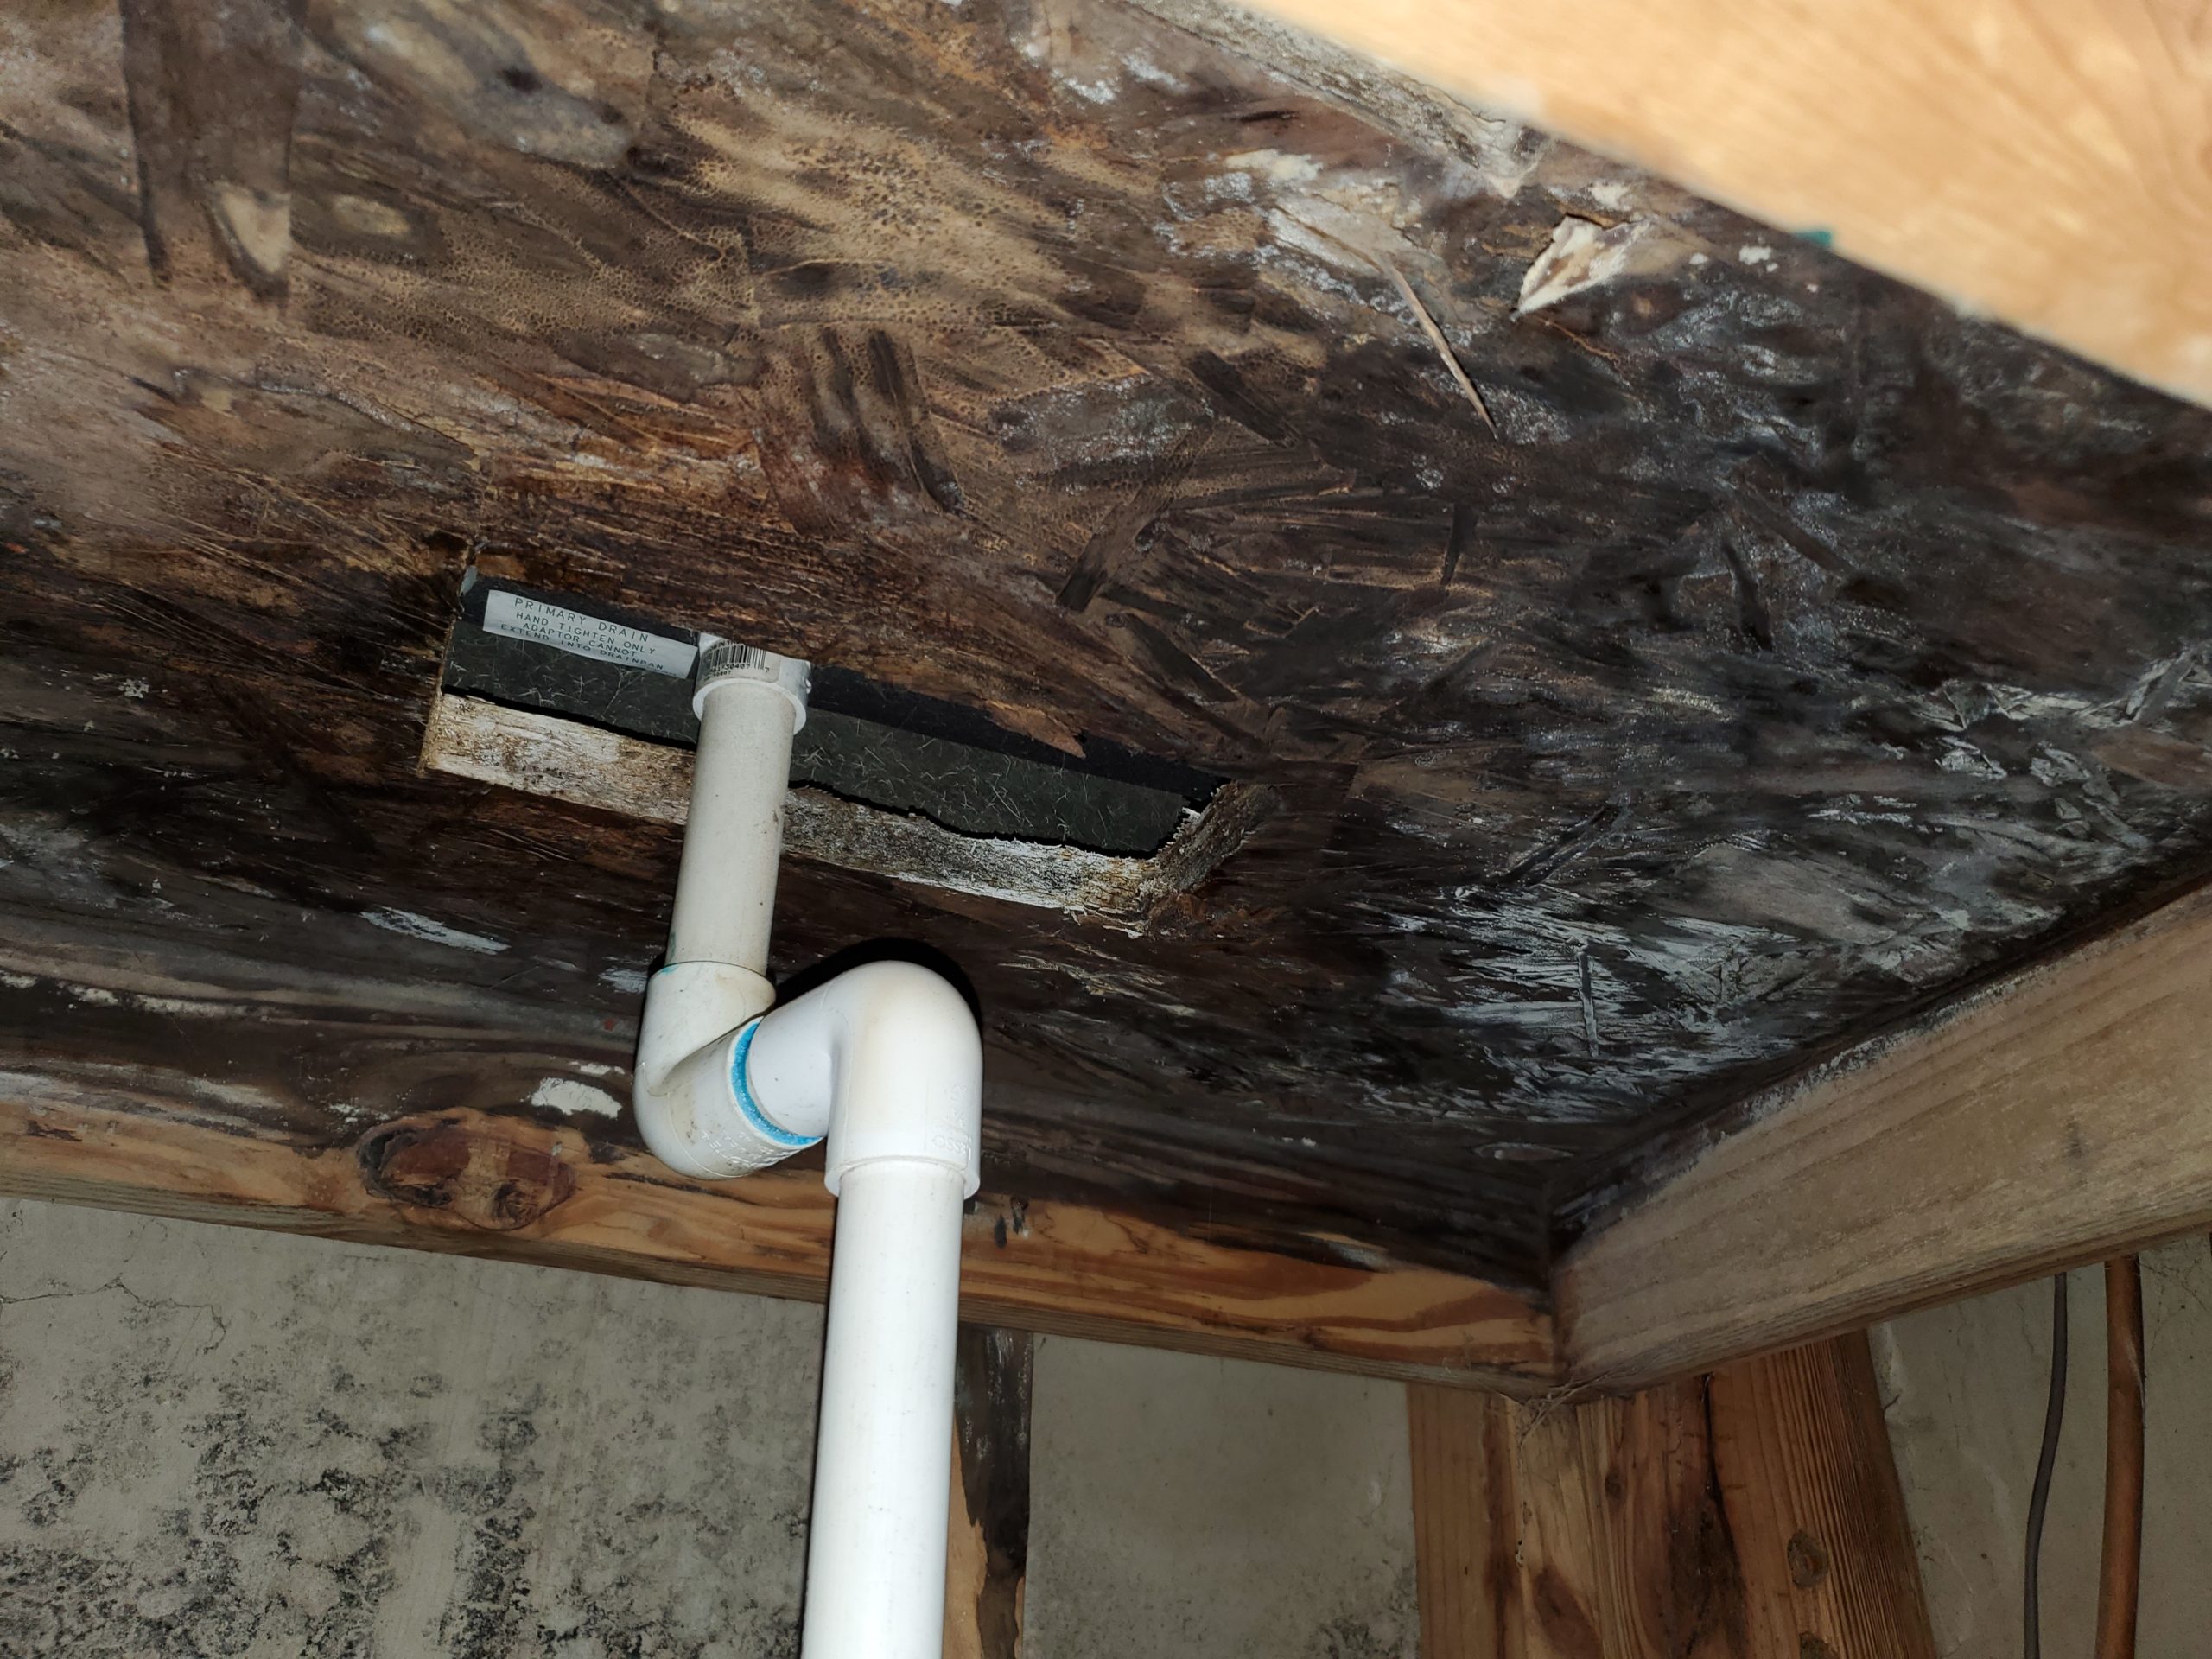 Photo taken by mold assessor in Florida of mold growth below ac unit